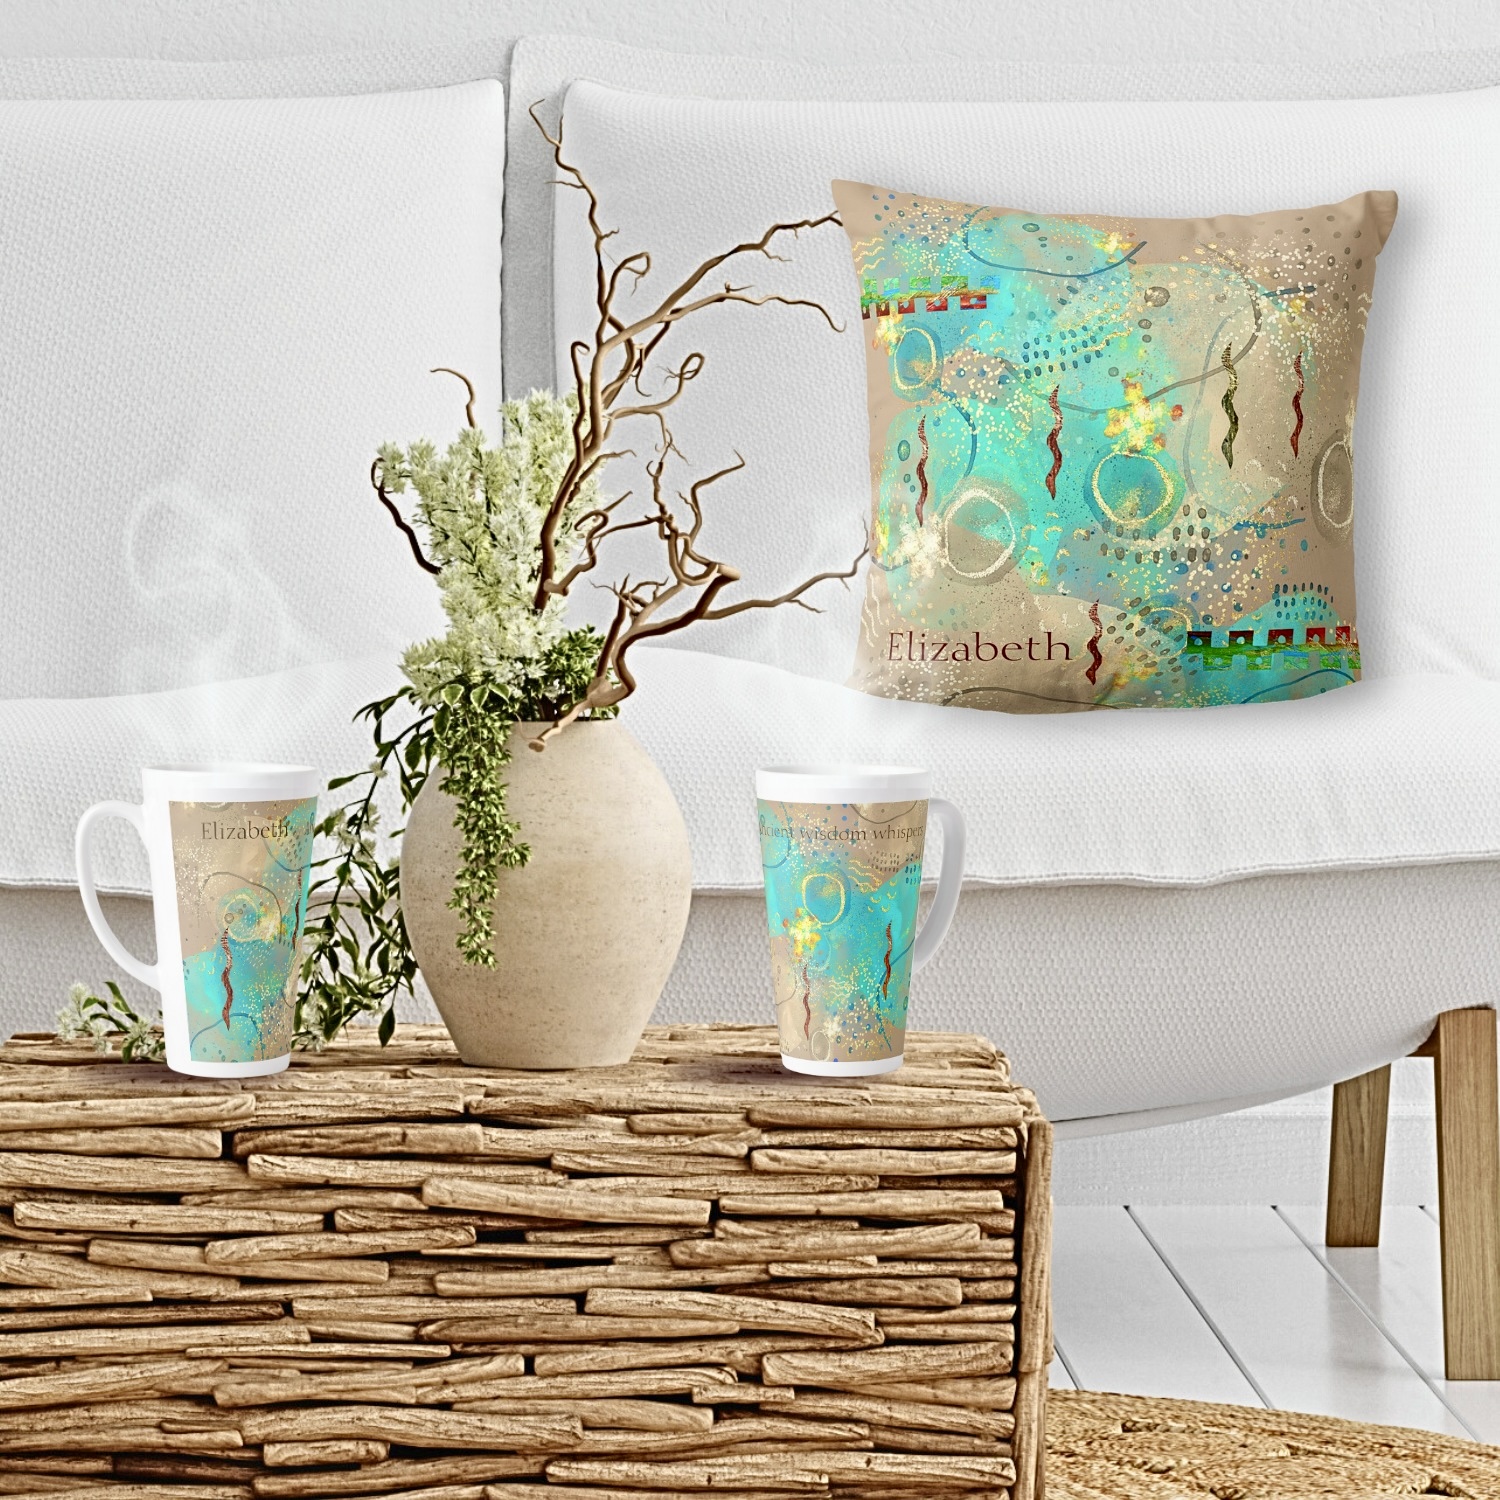 Turquoise Golden Ancient Wisdom Mug and Pillow: Your gateway to serenity amidst modern chaos.